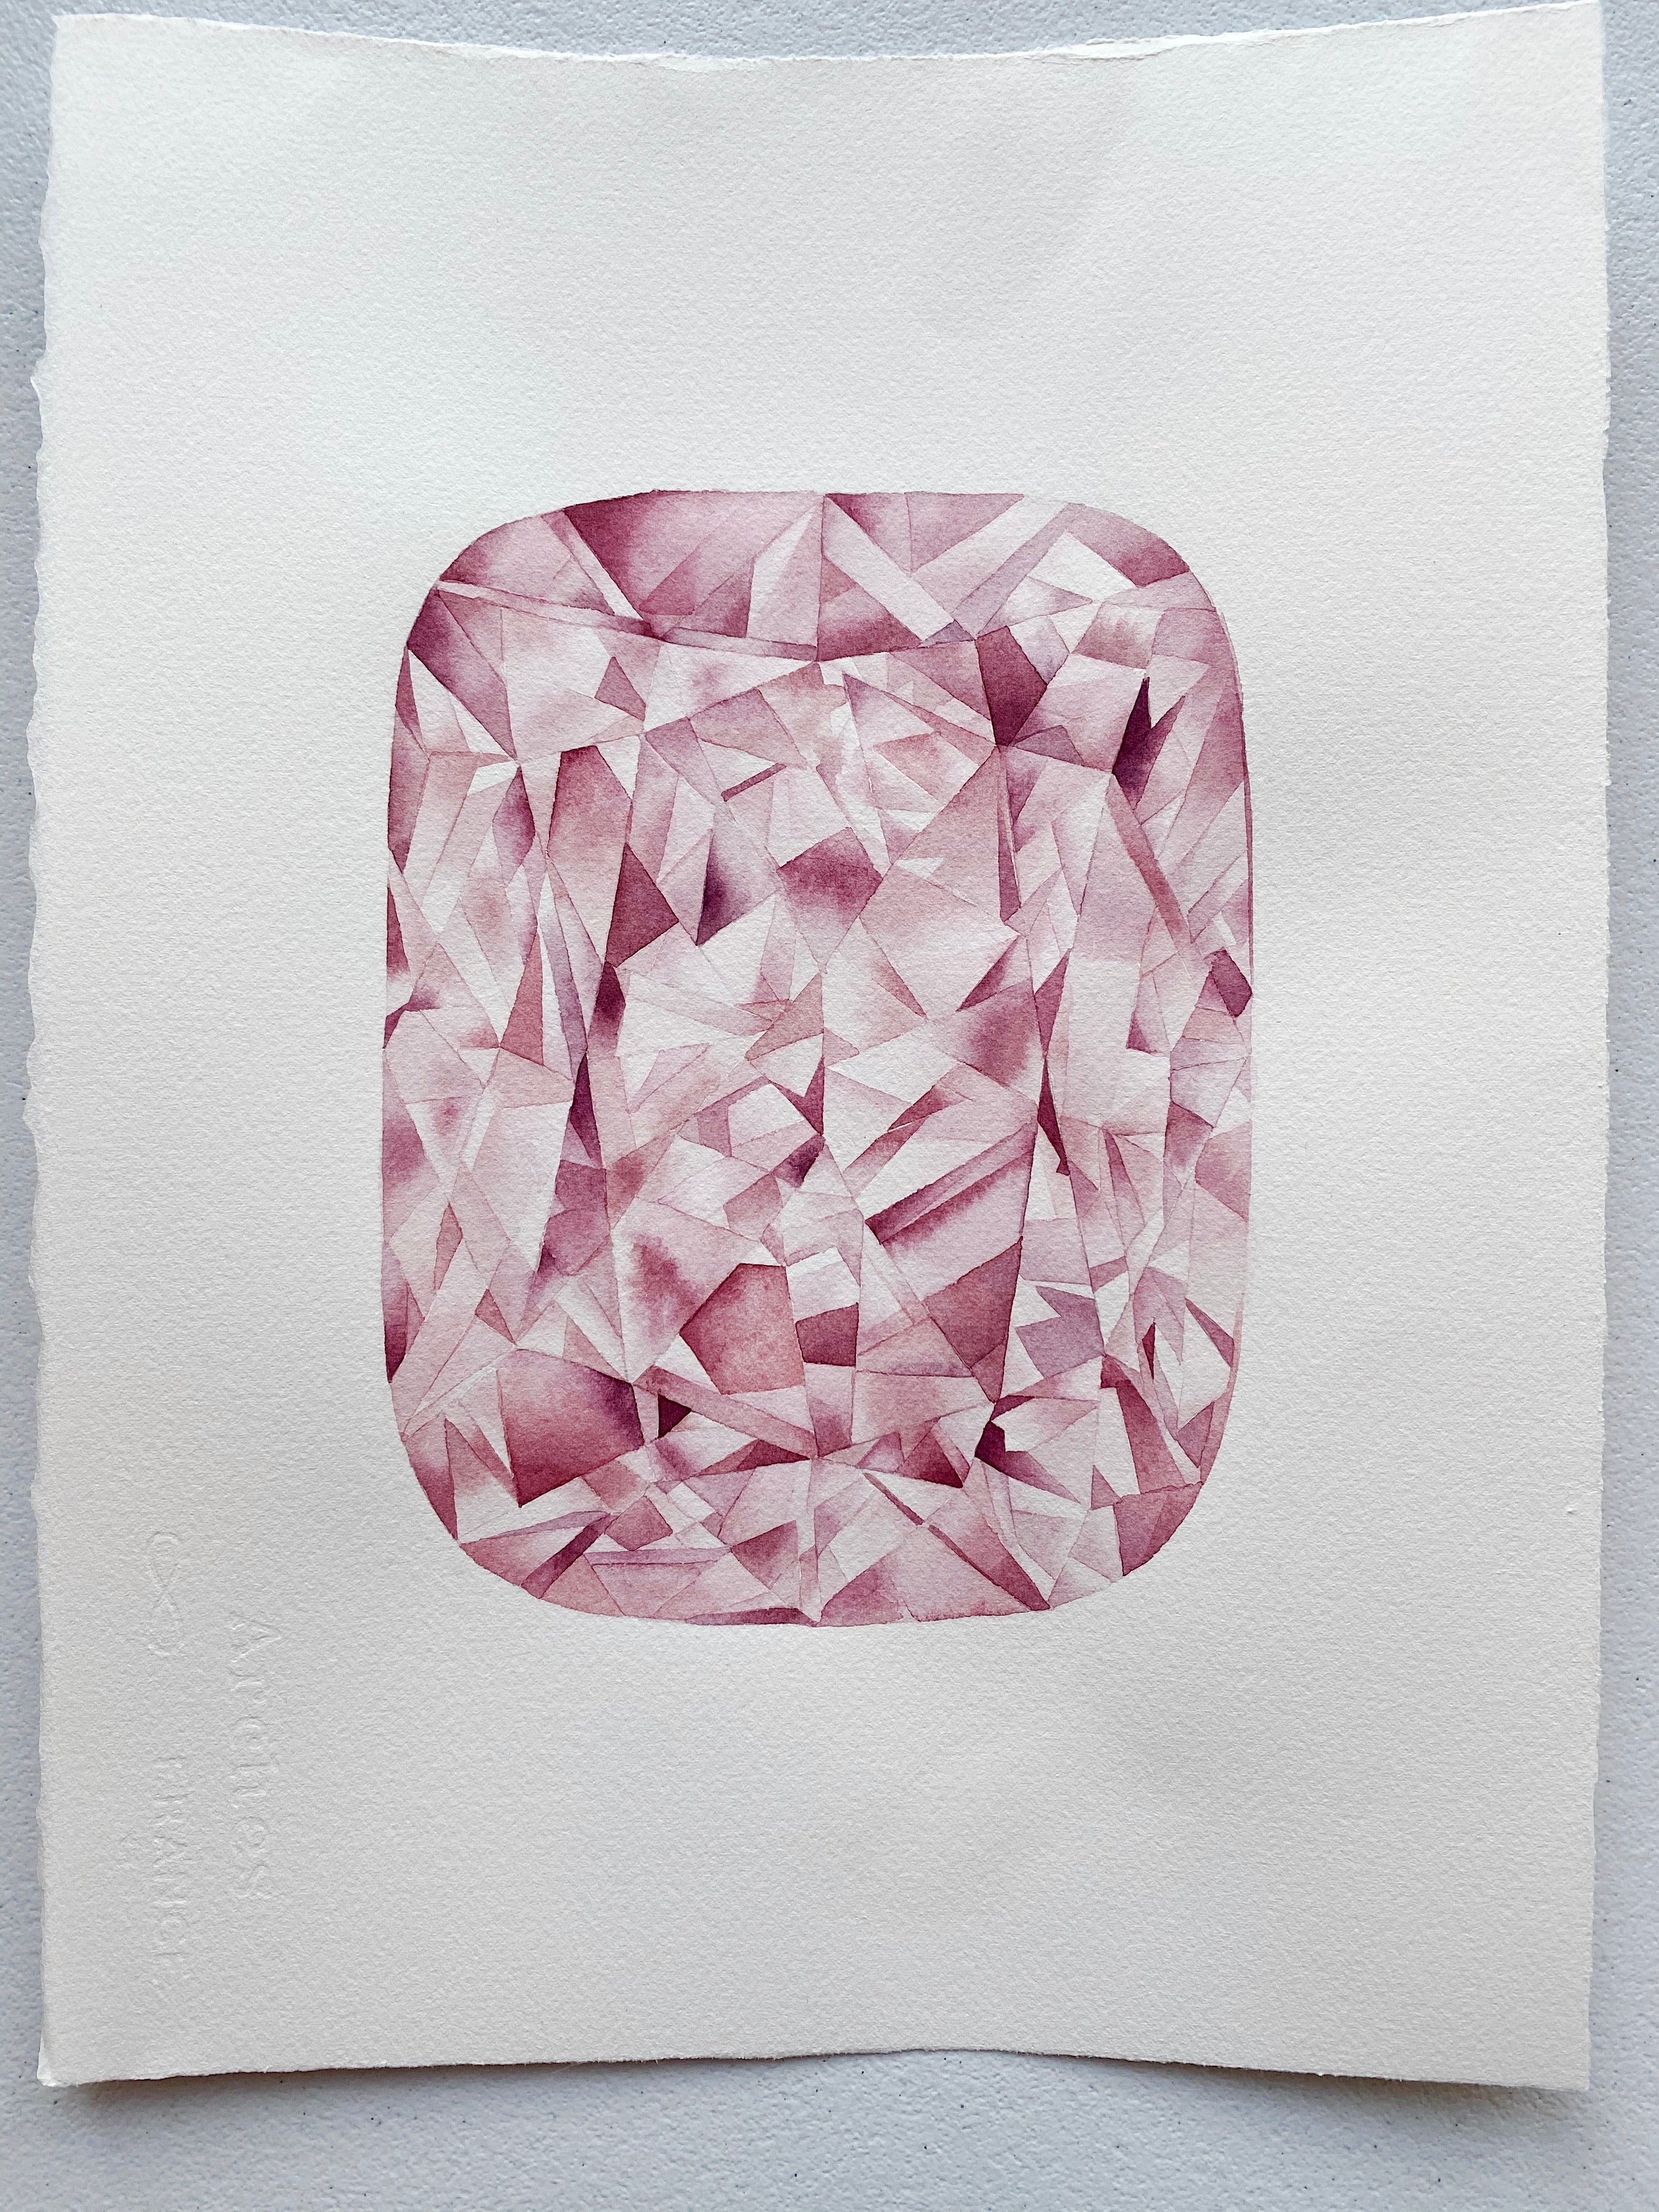 Original Painting - Watercolor Pink Diamond Painting 11x15 inches